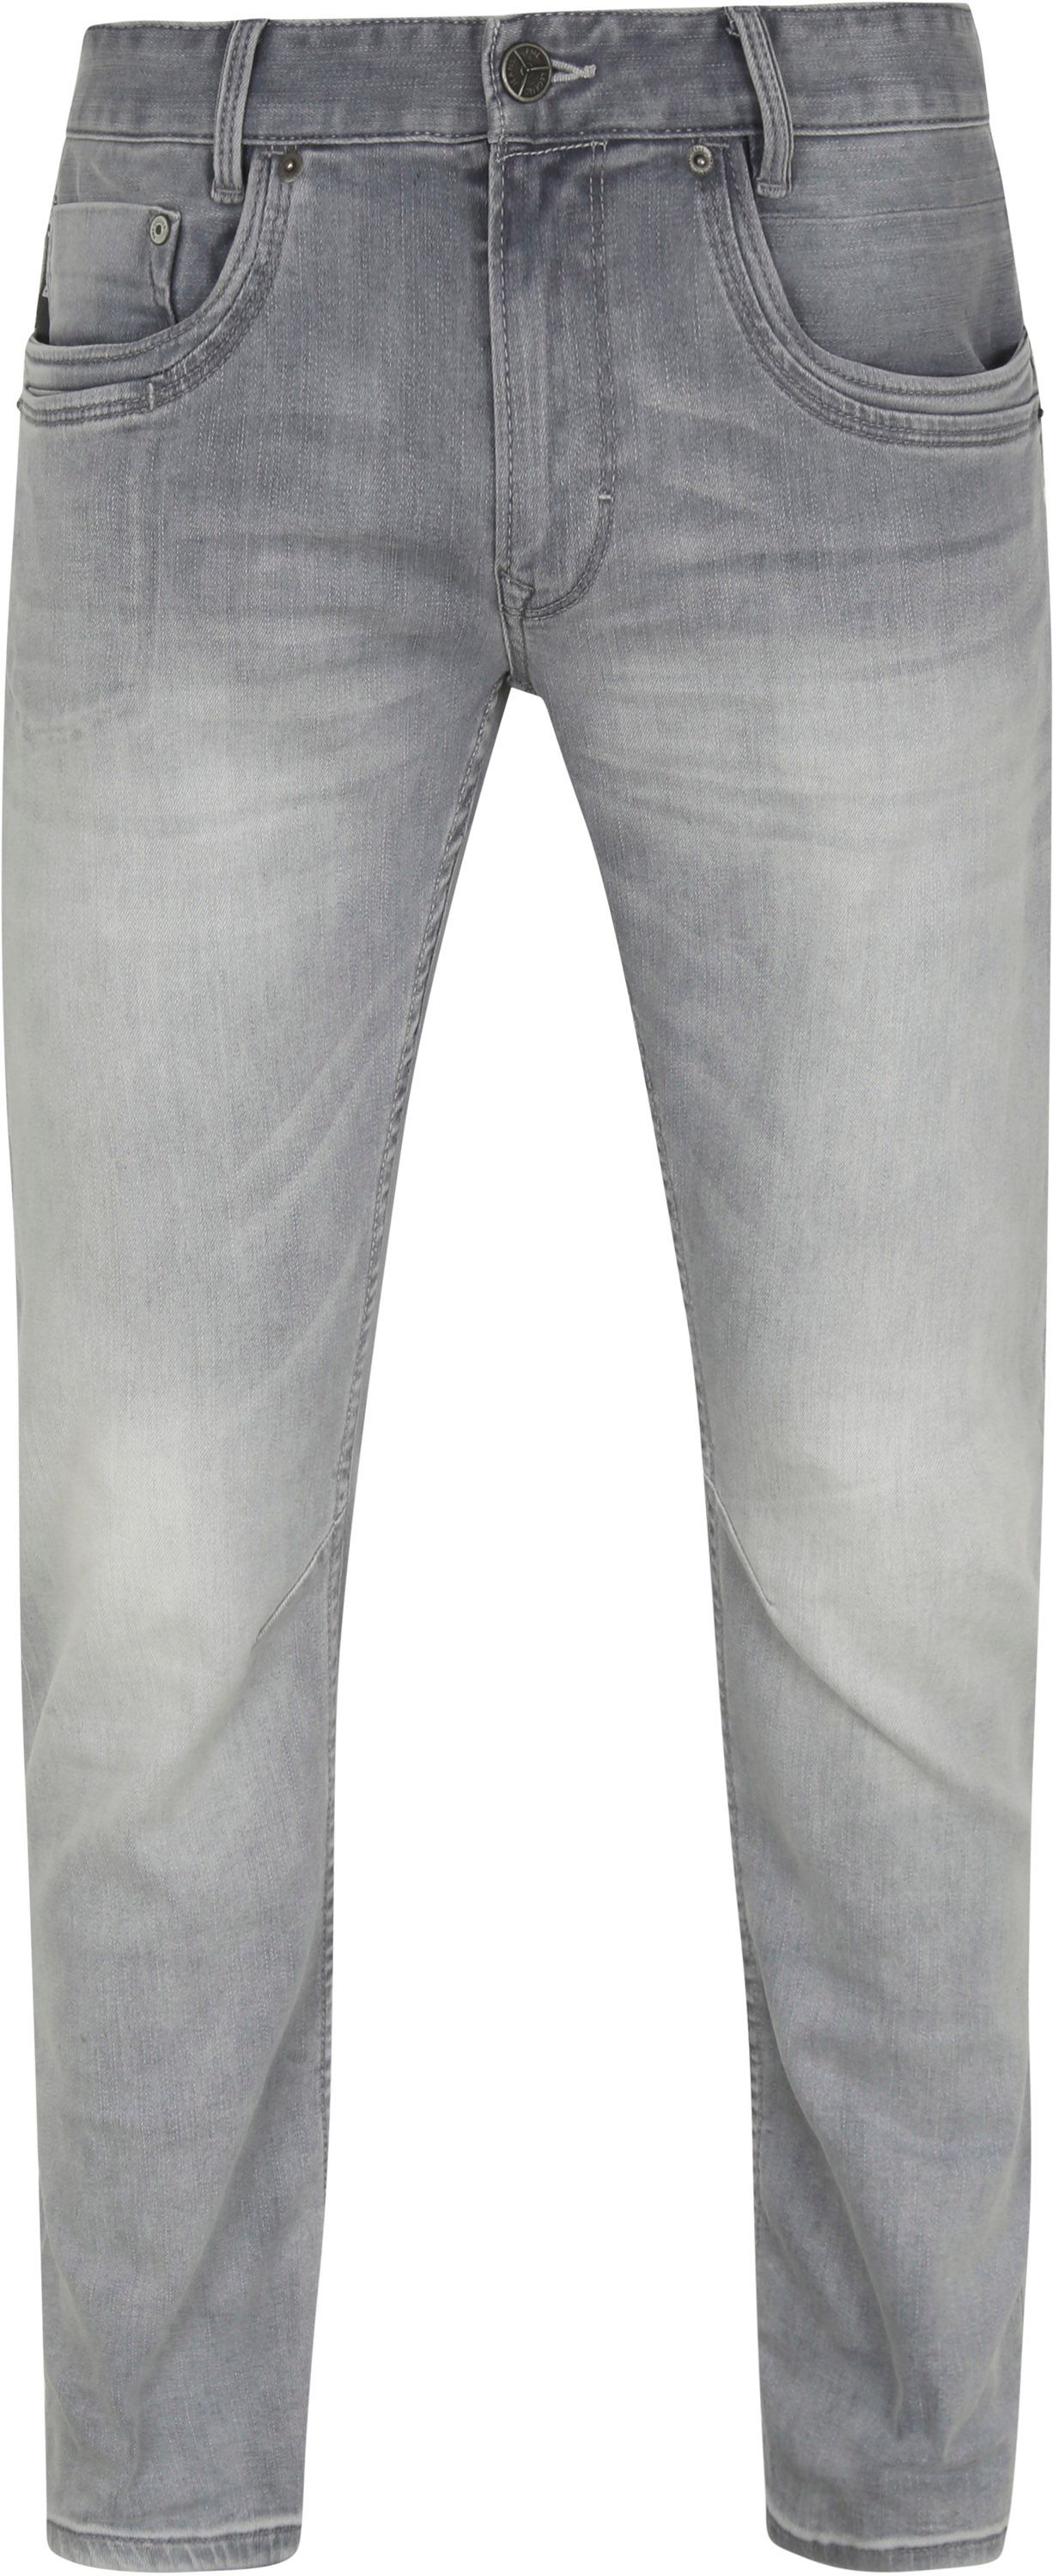 PME Legend Skymaster Jeans Bleached Grey size W 36